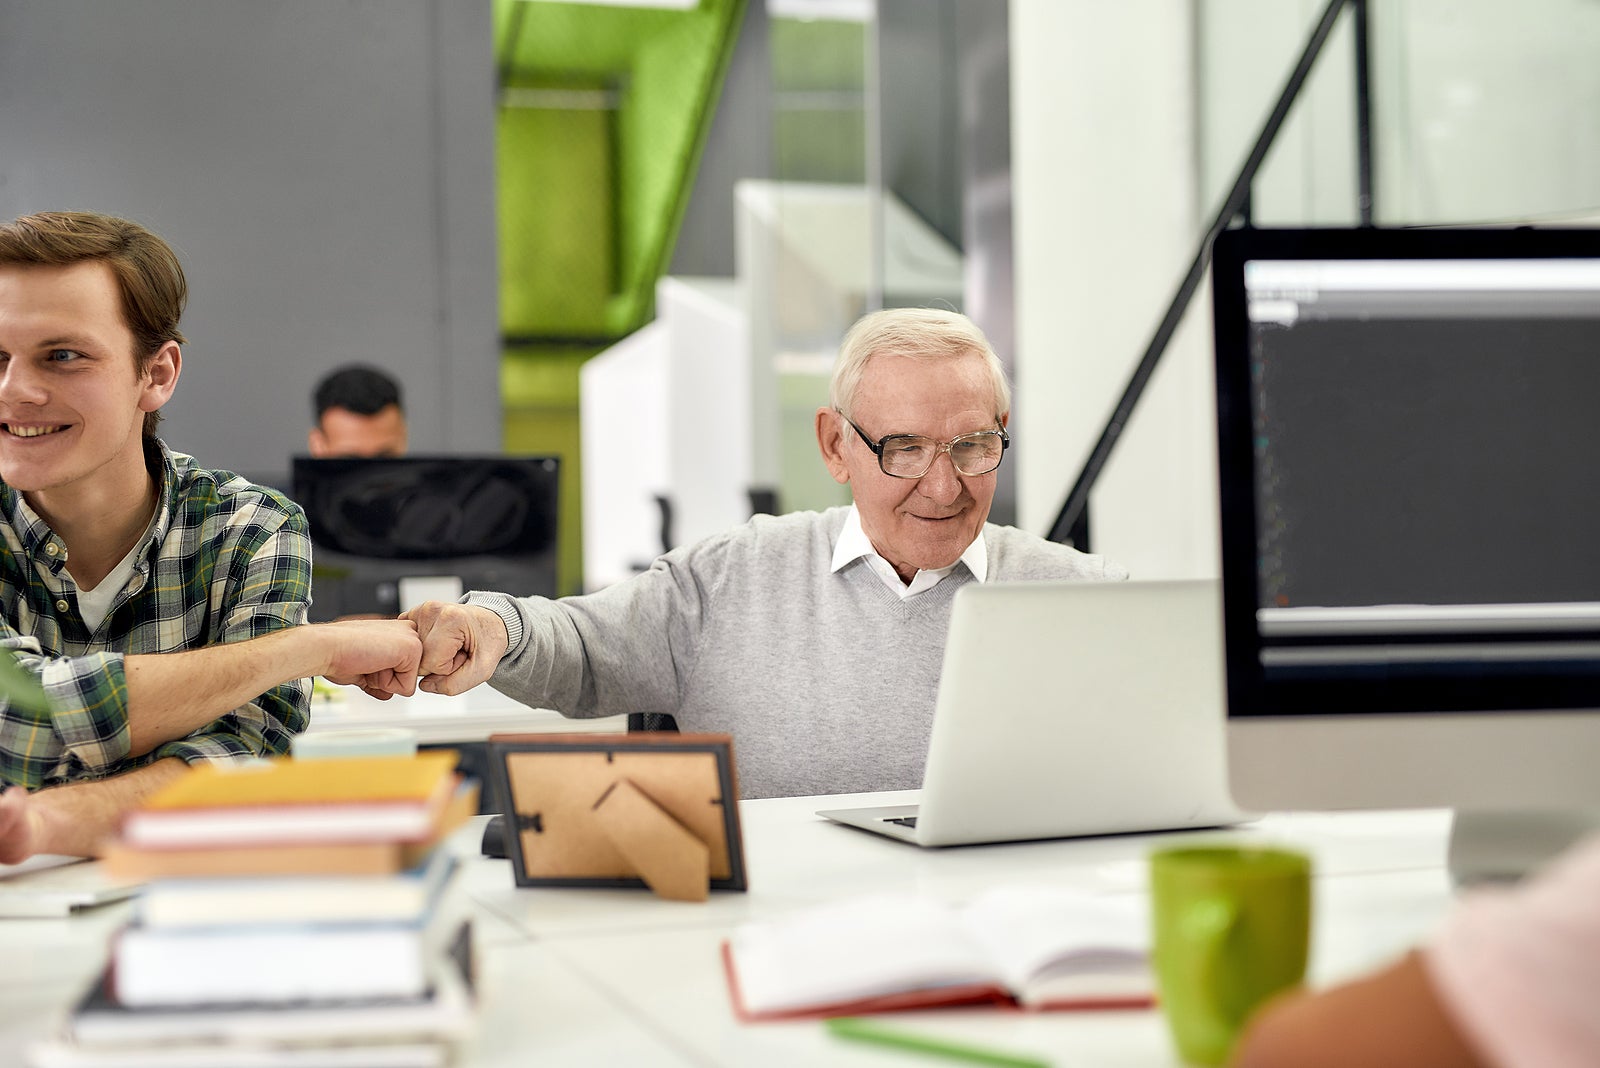 Aged man, senior intern looking at the screen of his laptop and doing a fist bump with colleague, Friendly male worker engaging new employee, working in the office, Selective focus, Horizontal shot